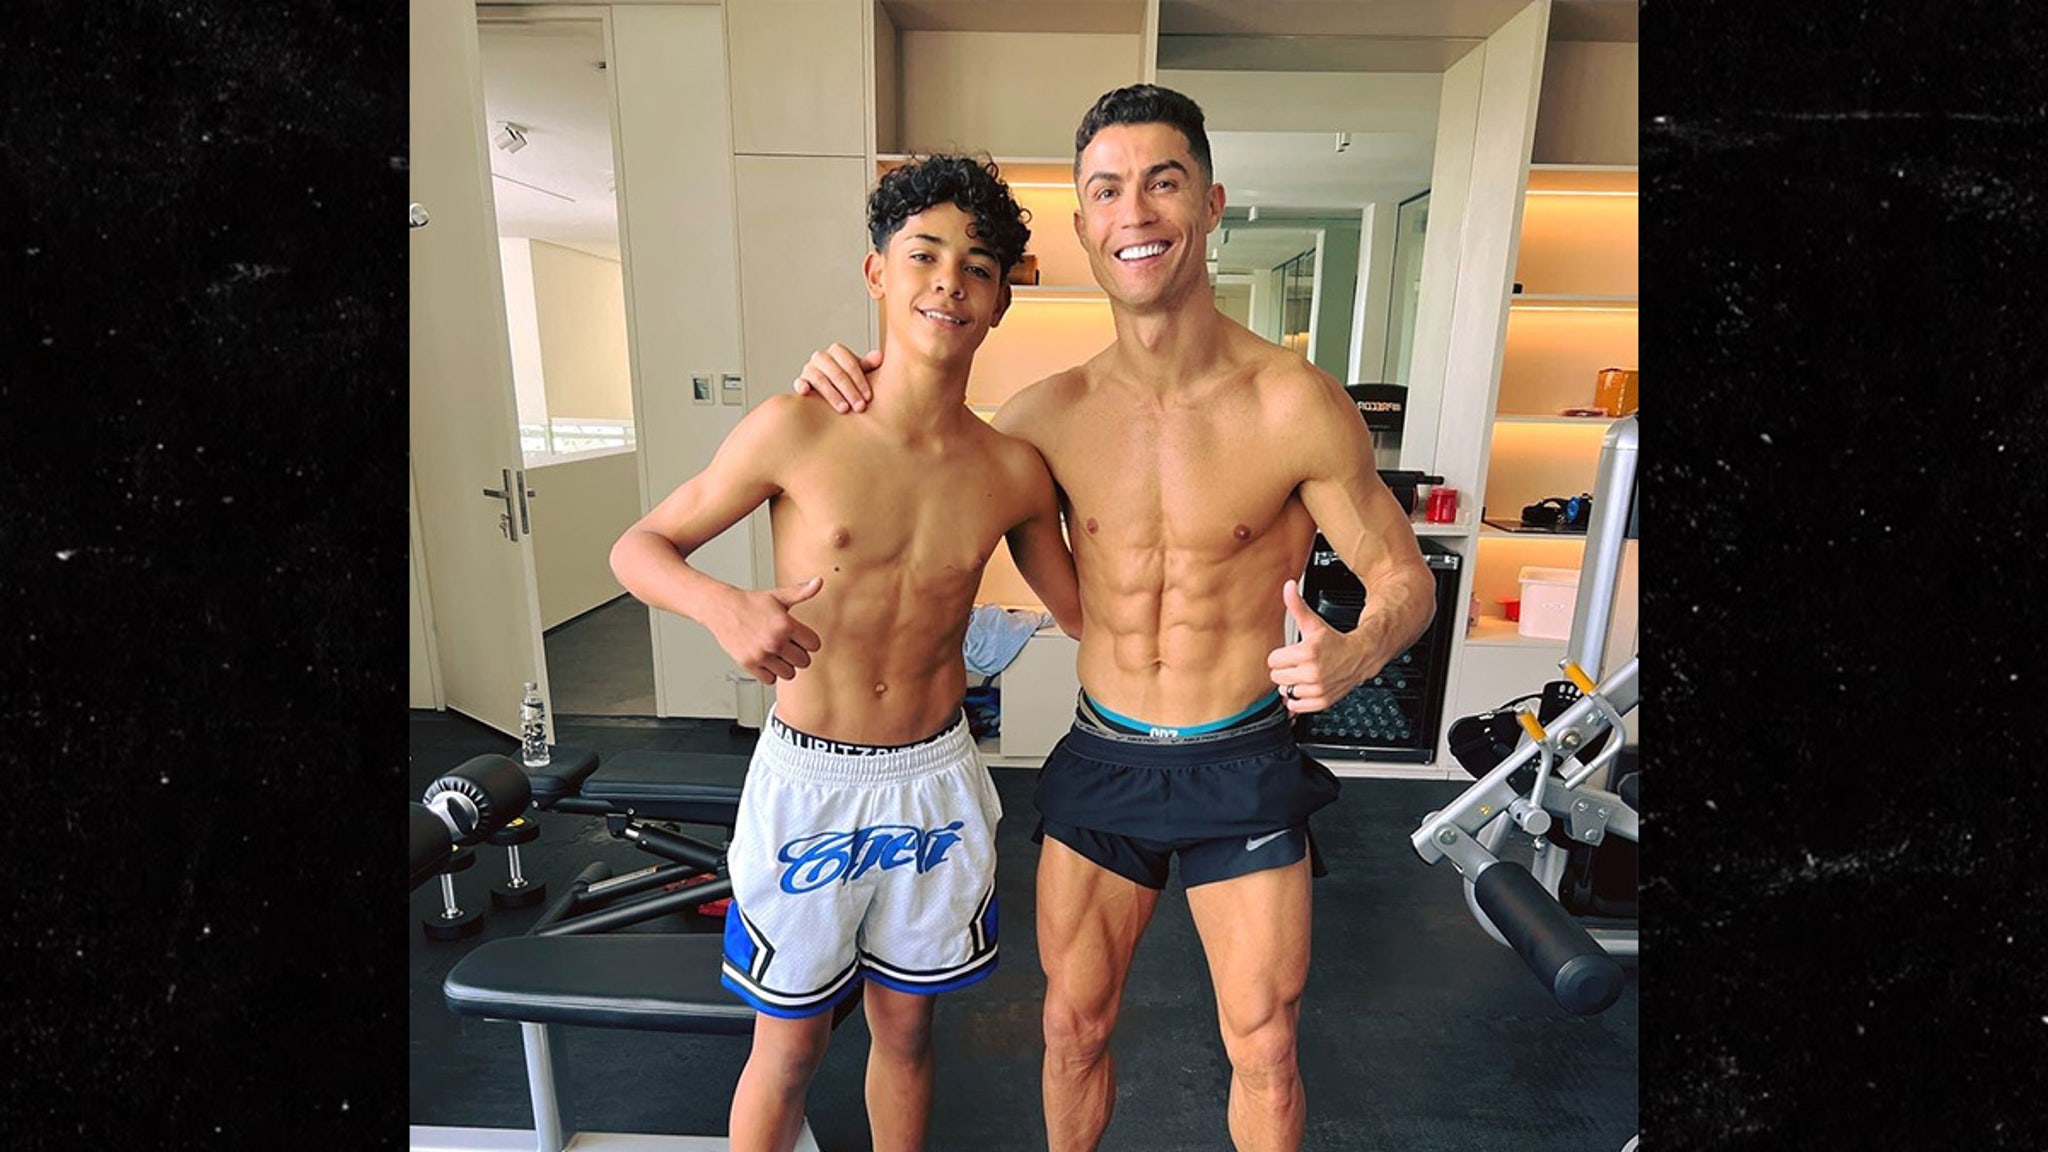 Cristiano Ronaldo,13-Year-Old Son Show Off Shredded Abs After Workout